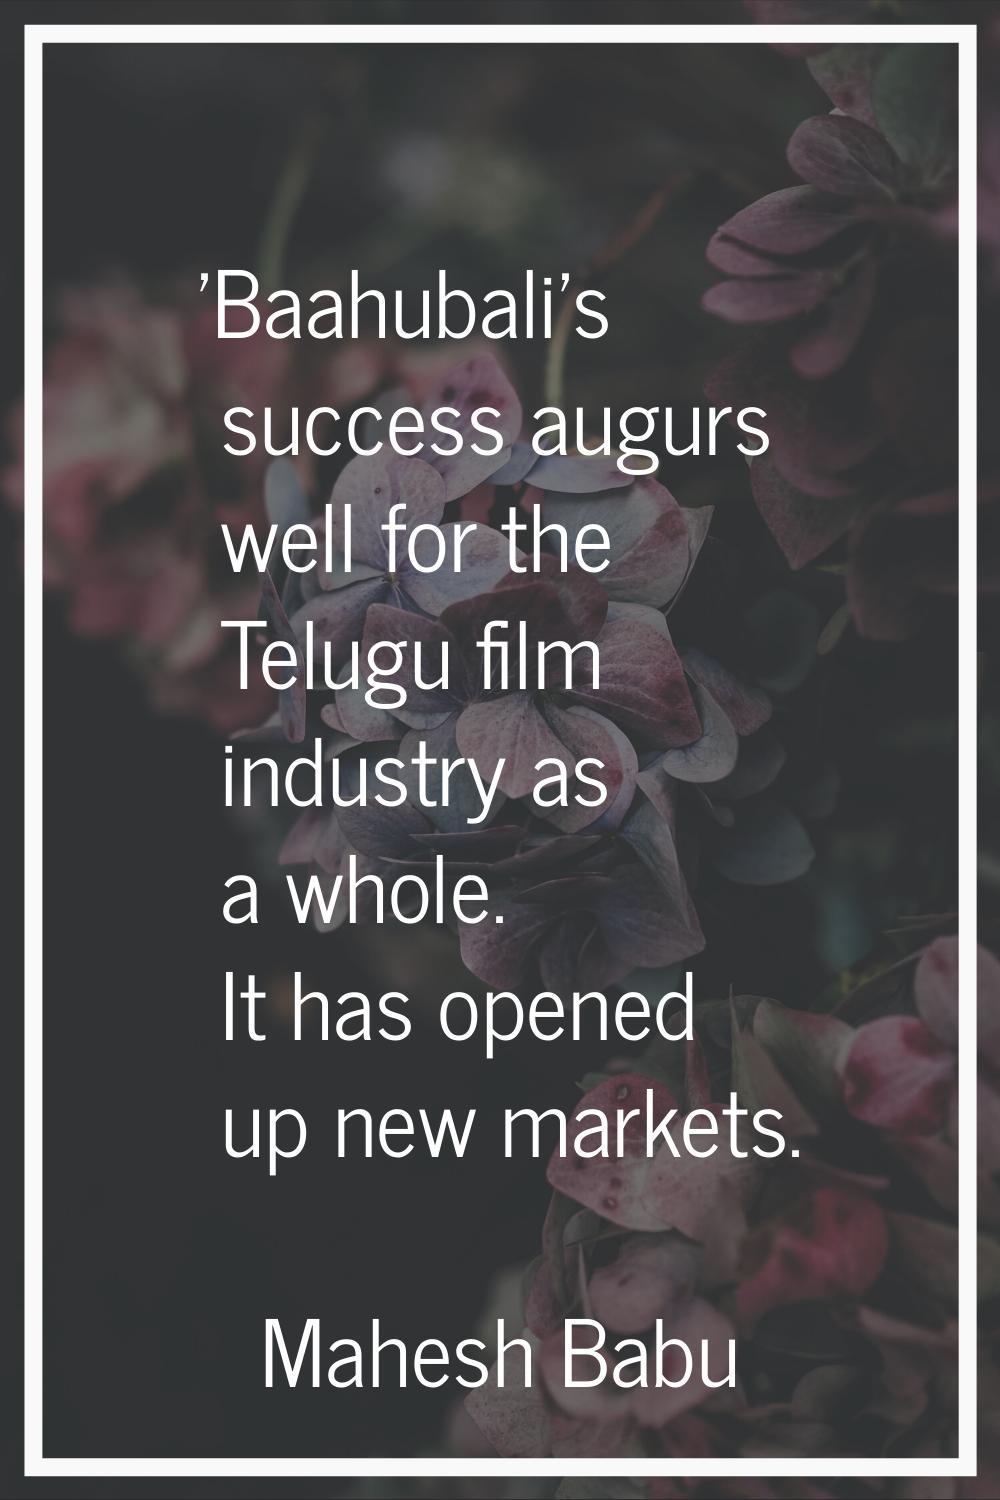 'Baahubali's success augurs well for the Telugu film industry as a whole. It has opened up new mark